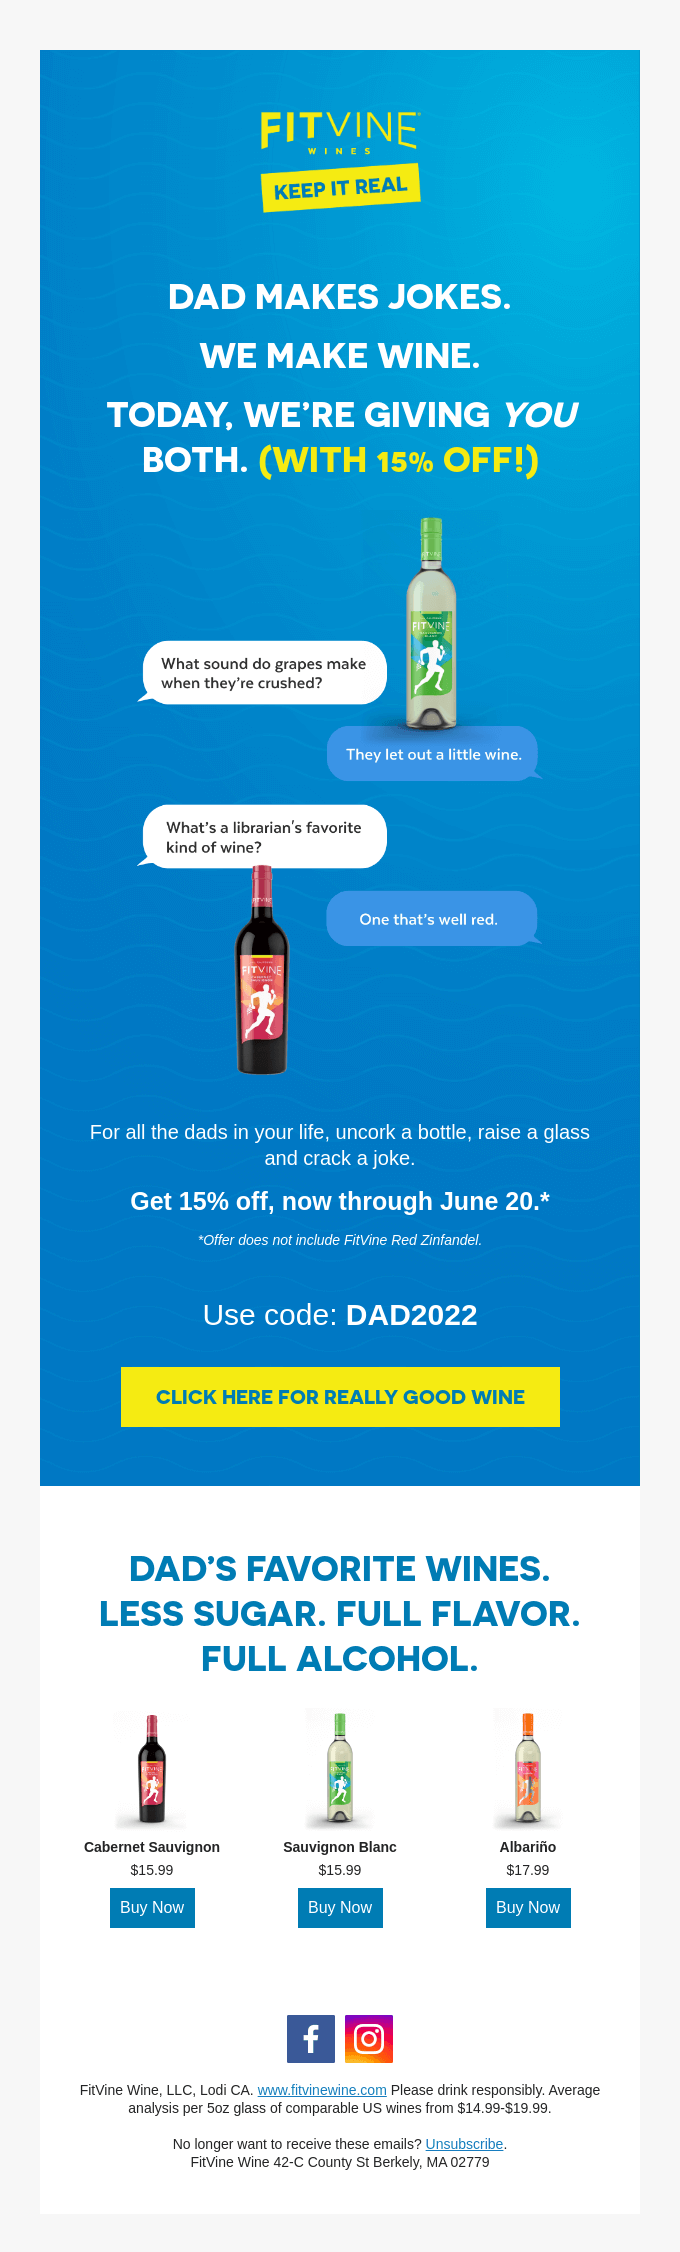 For Father’s Day, here’s 15% off (and some real good dad jokes)